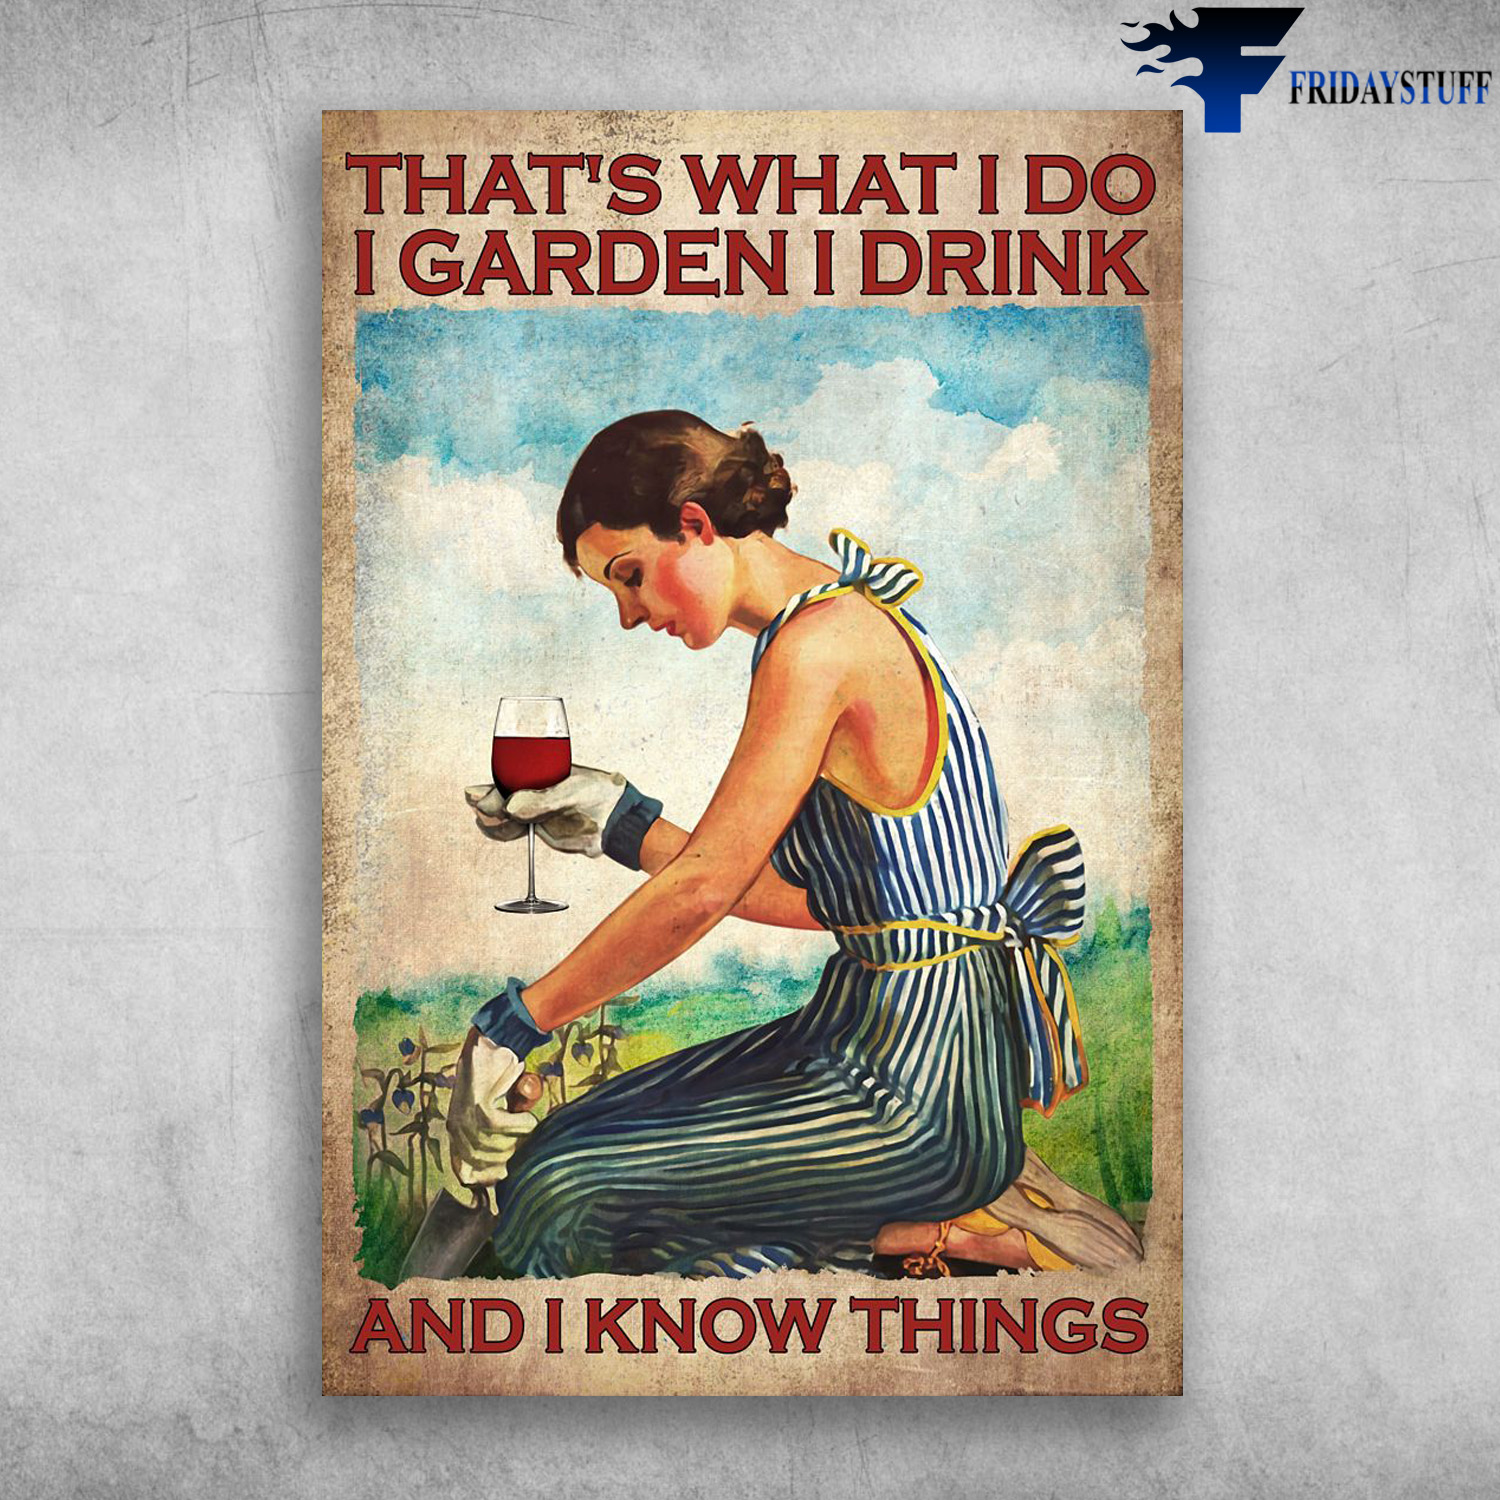 Girl Loves Gardening And Wine - That What I Do, I Garden, I Drink, And I Know Things